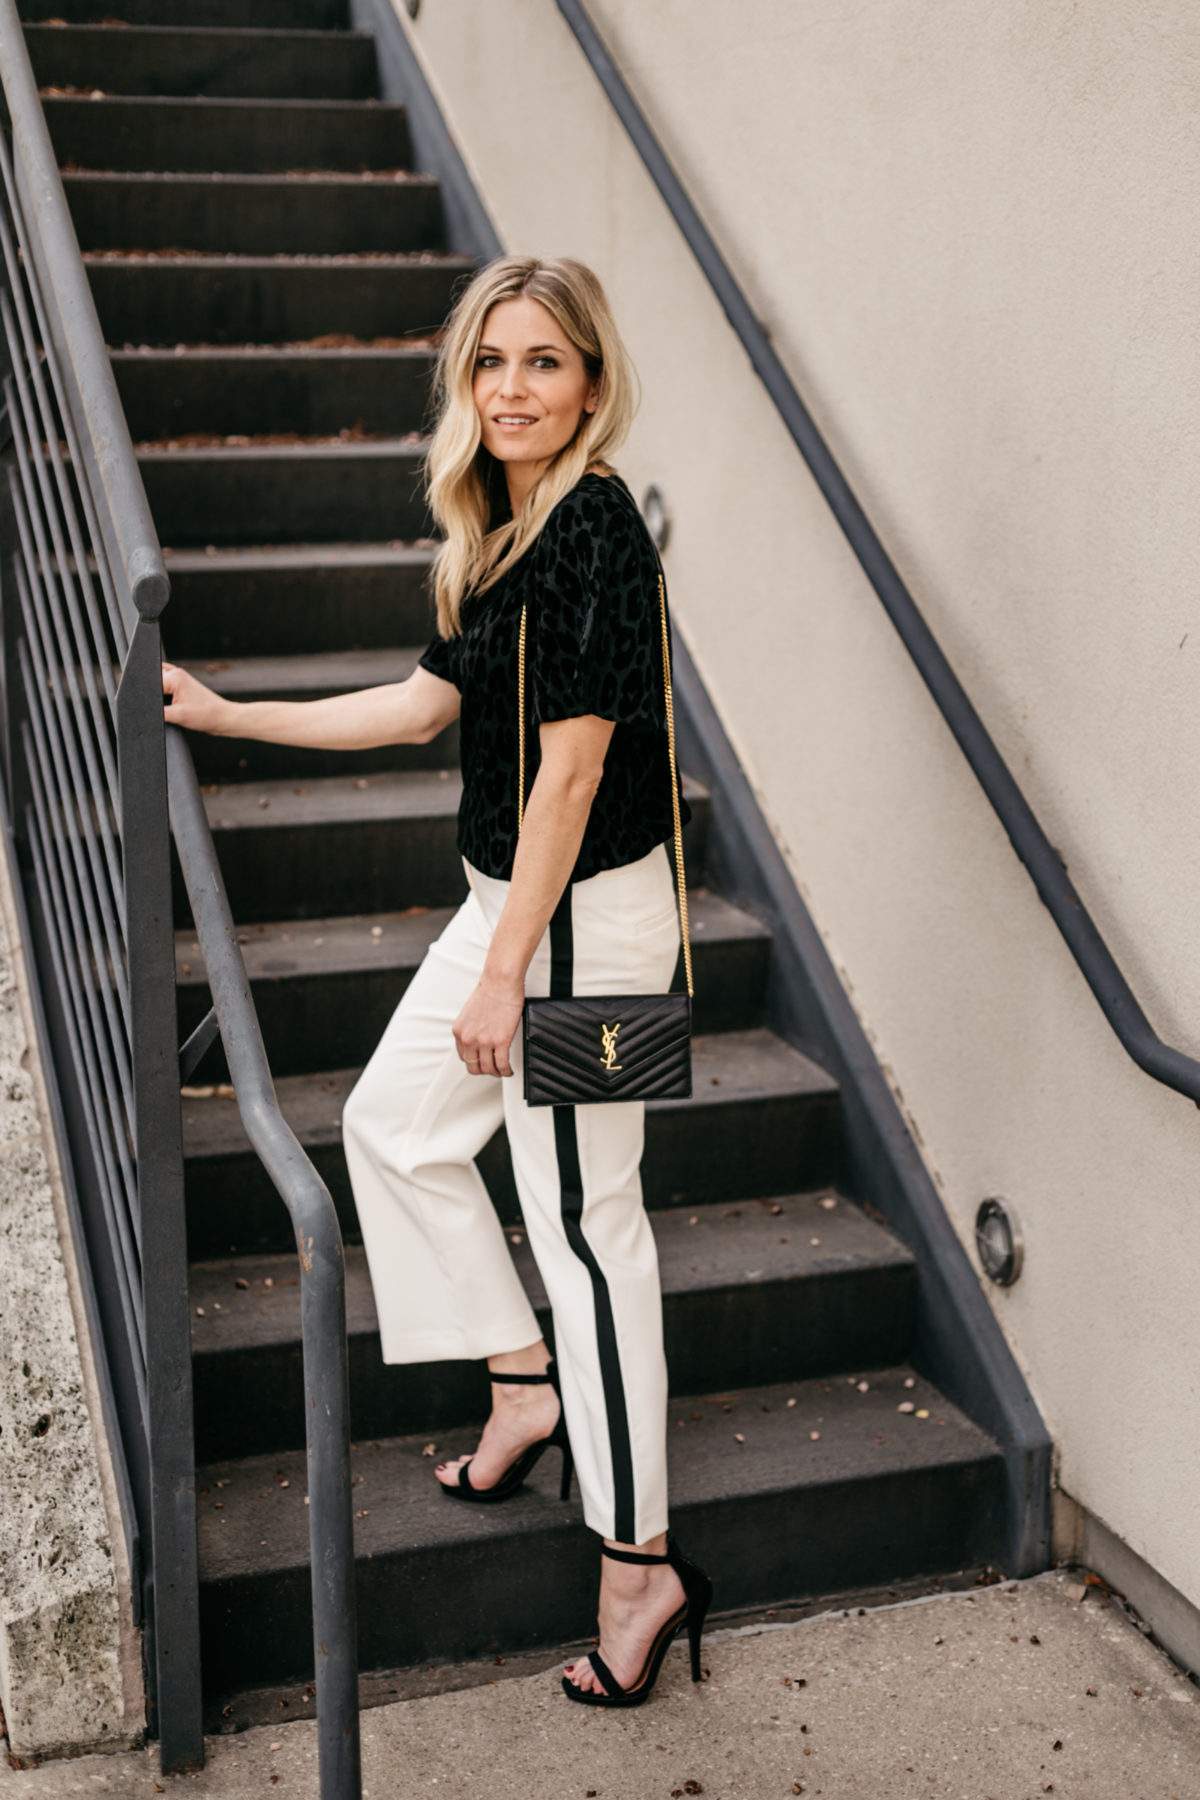 OUTFIT 3  White Wide Leg Stripe Pants // Black Short Sleeve Blouse // Black and Gold Crossbody Clutch // Black Strappy Heels